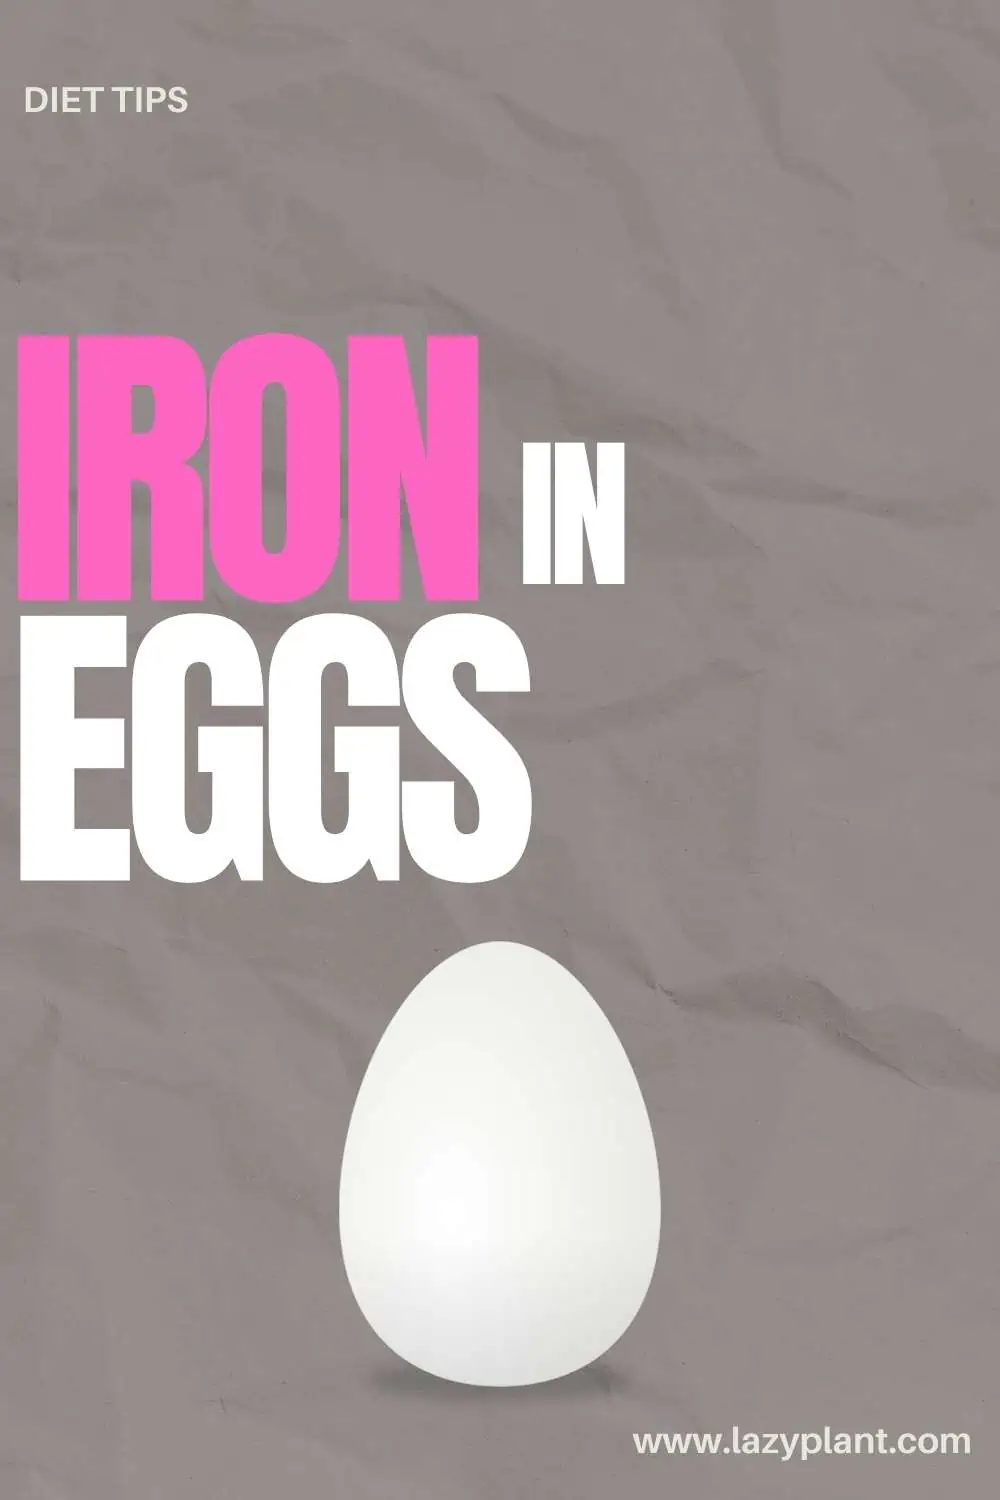 Eggs are a good Iron source